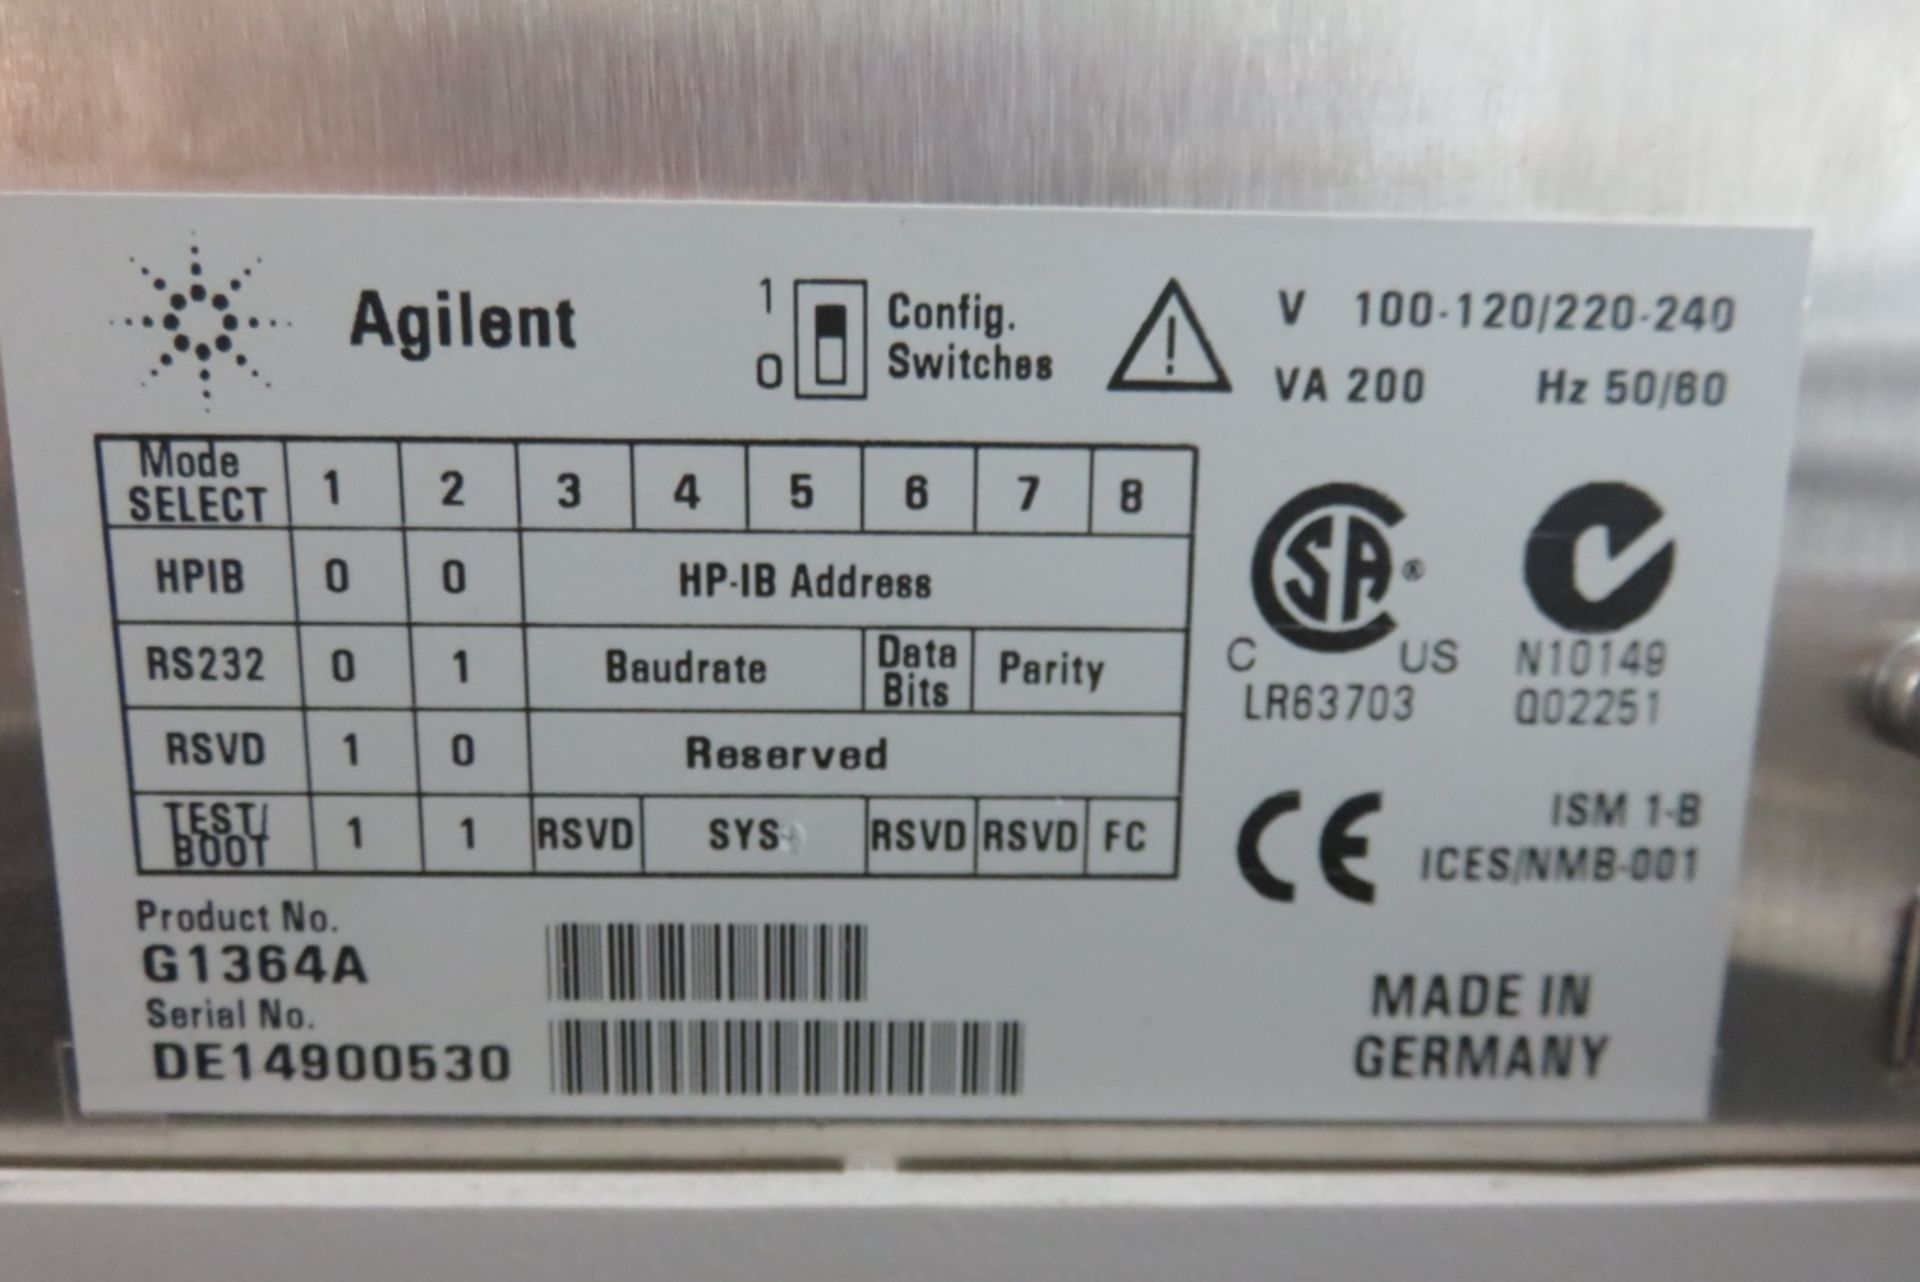 Agilent 1100 HPLC System with DAD Detector - Image 13 of 16